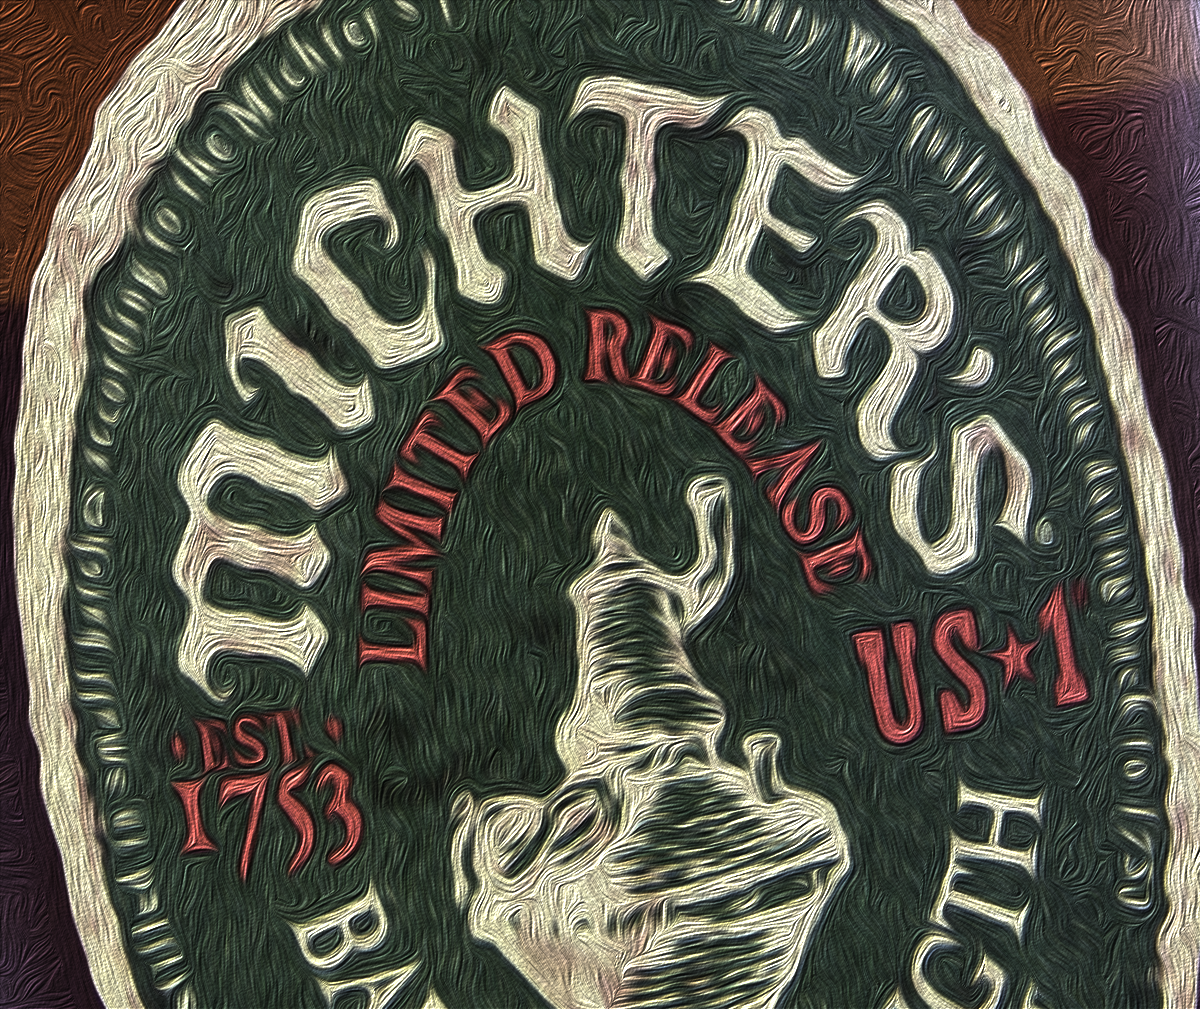 A stylized version of the Michter's label. Image ©2019, Mark Gillespie/CaskStrength Media.